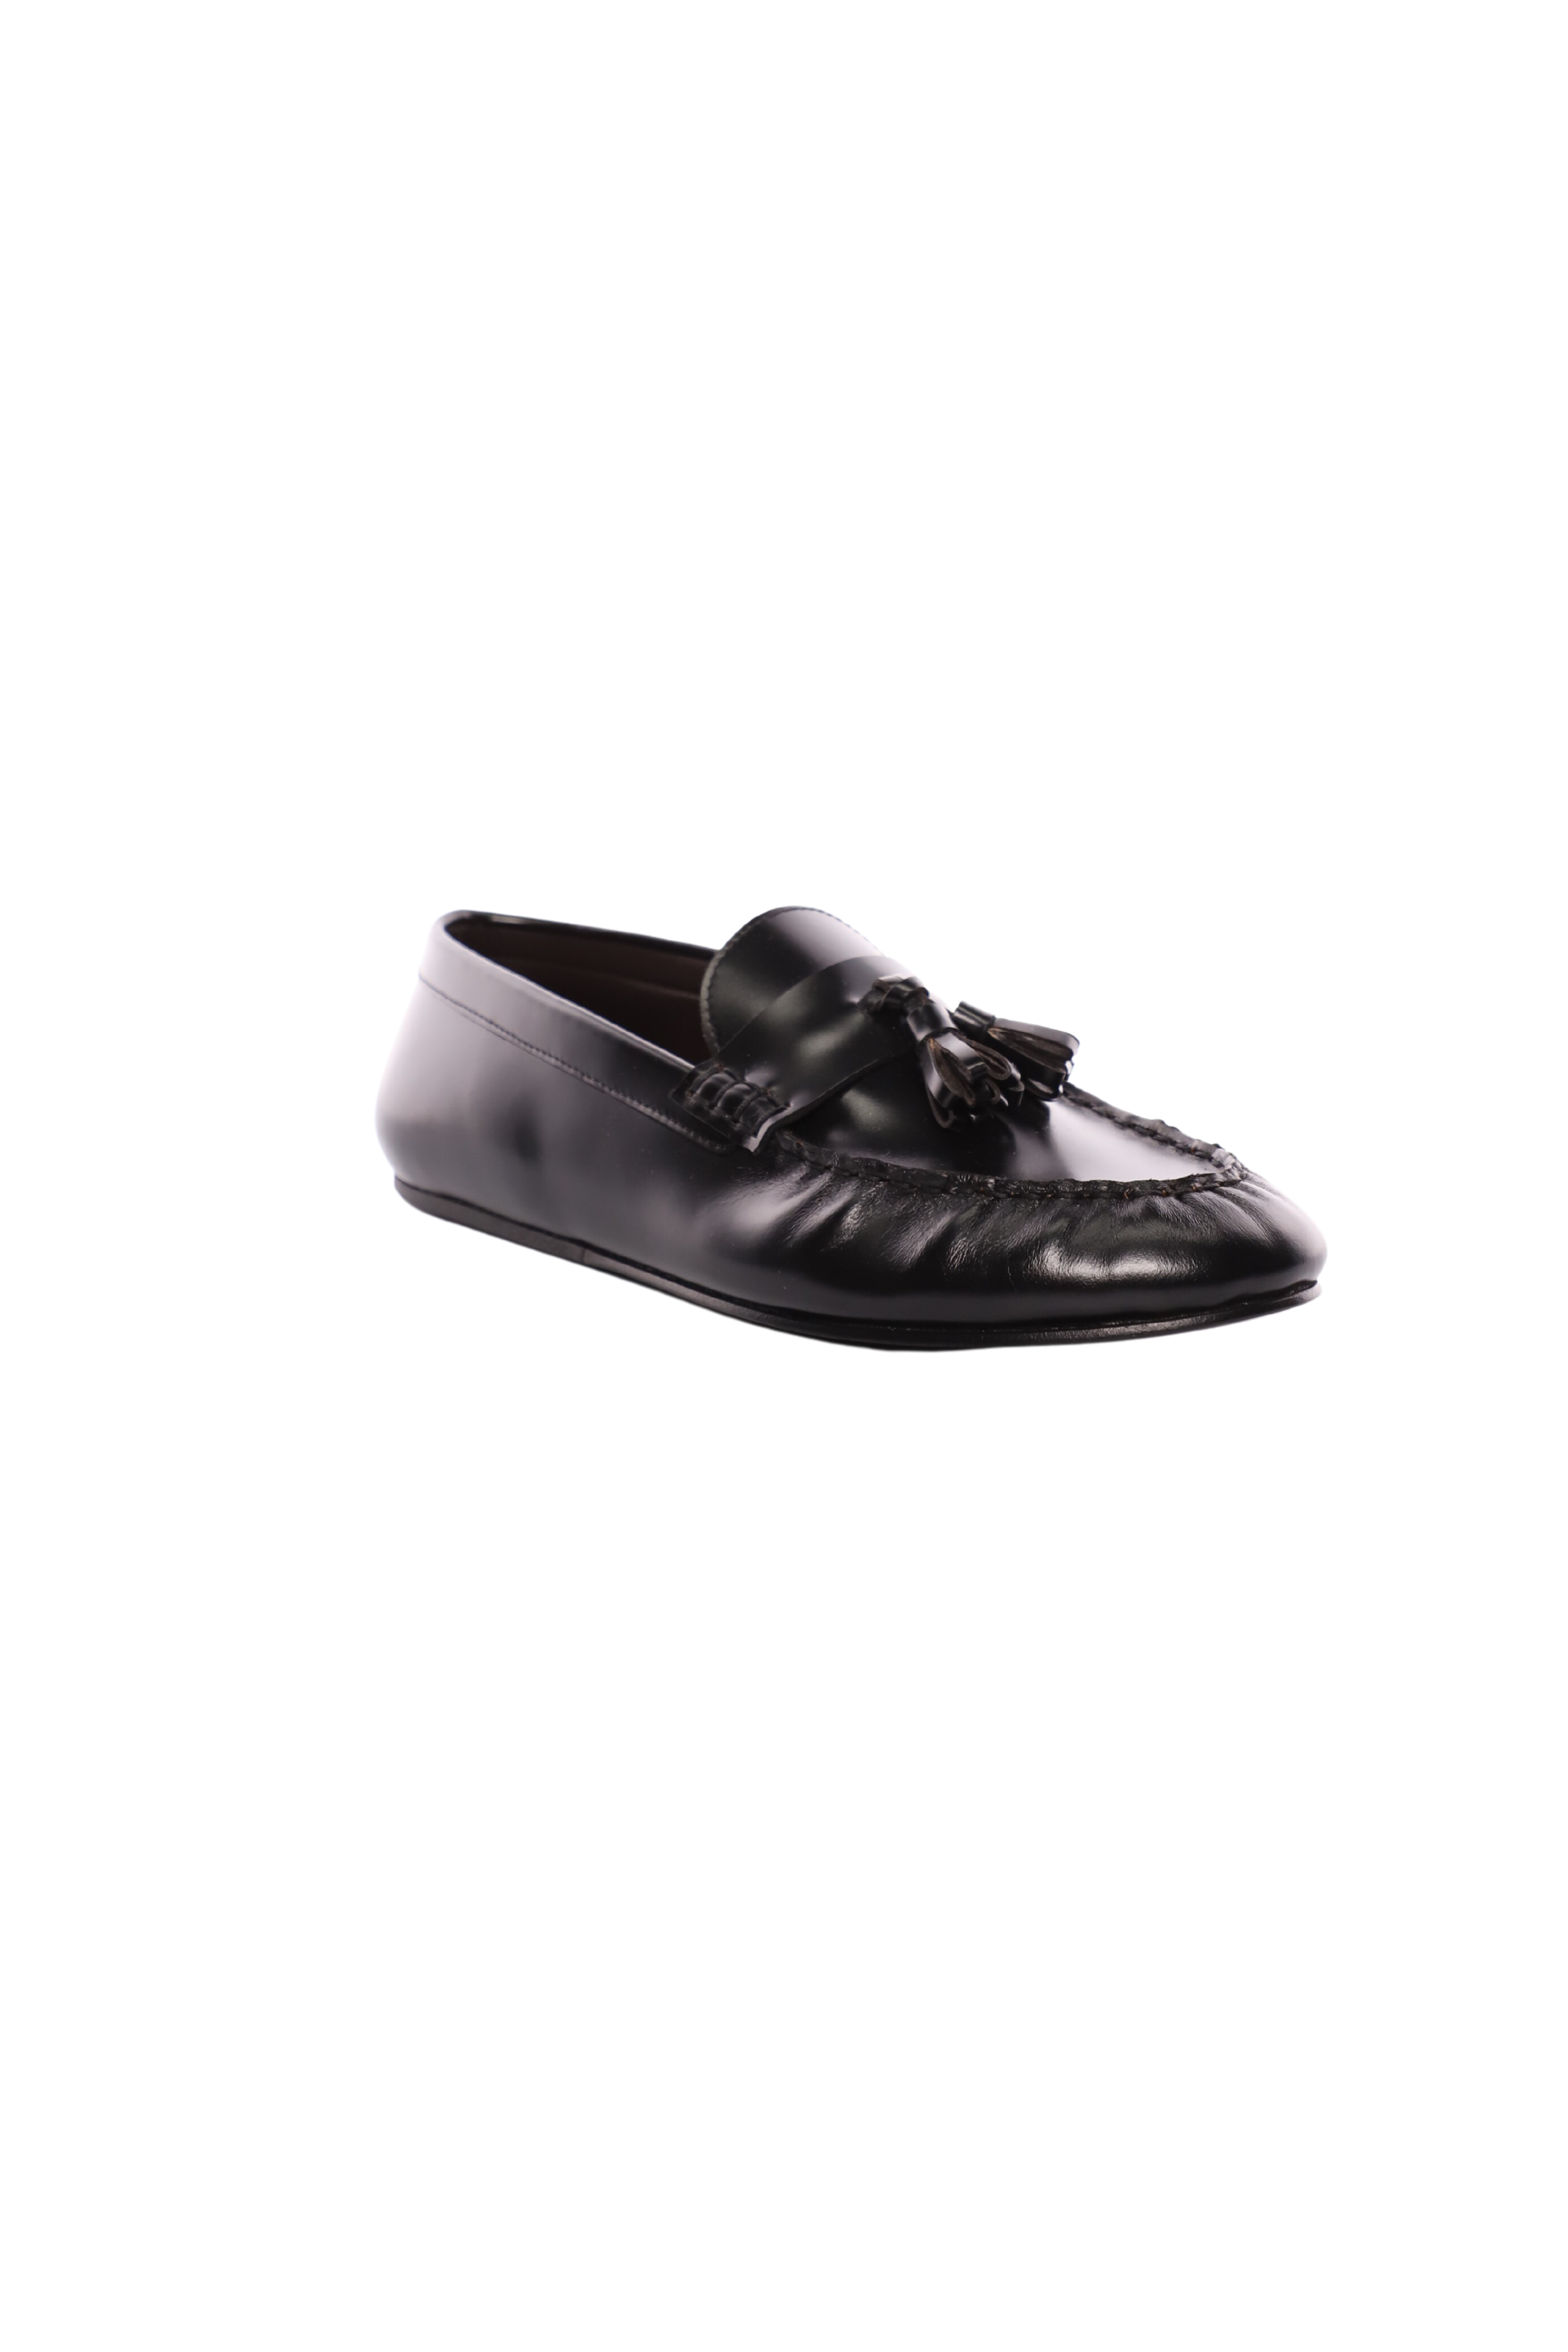 THE ROW Men's Black Loafers